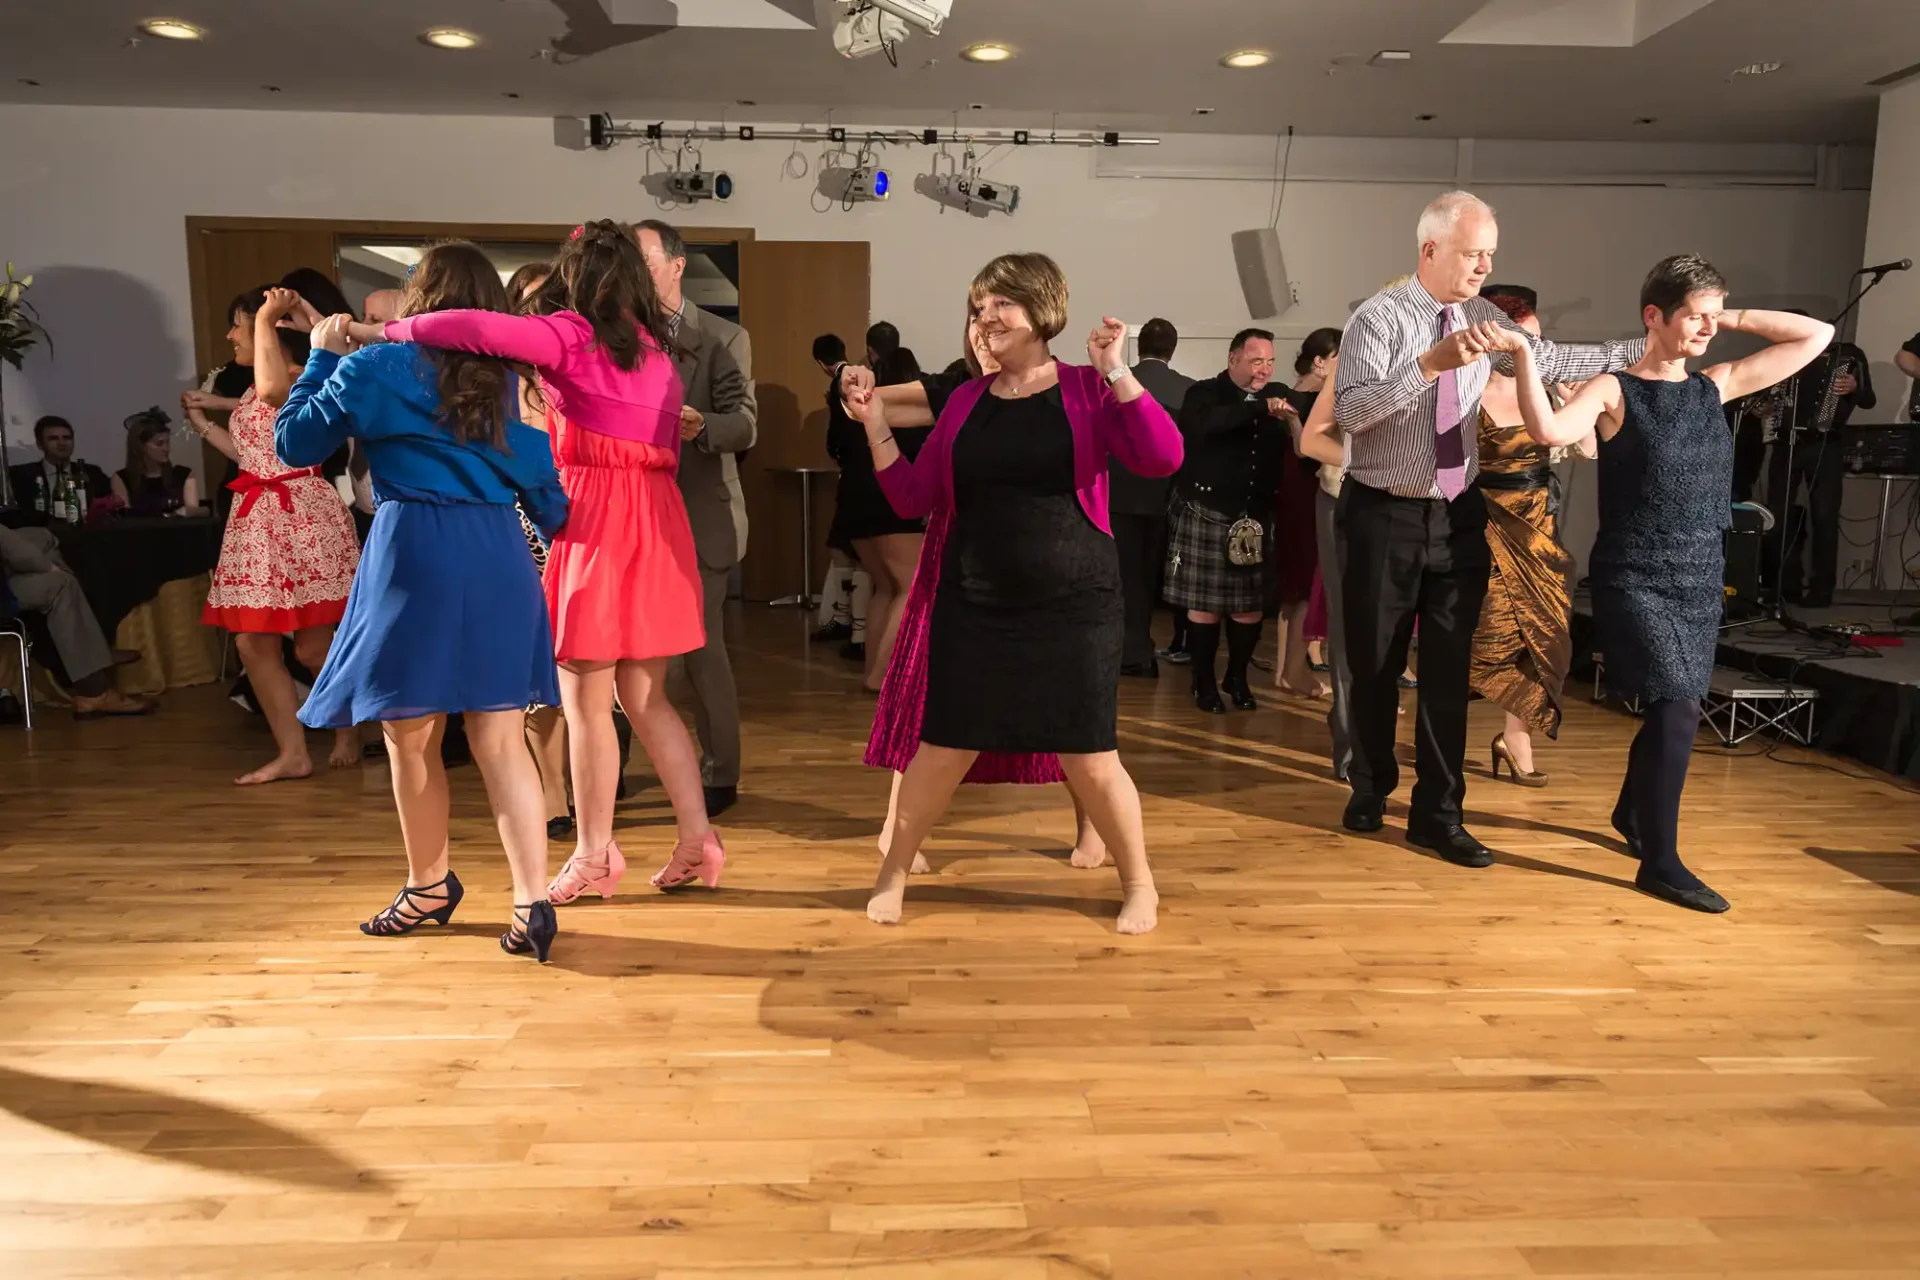 People dancing in pairs at a lively indoor event, on a wooden floor with a band performing in the background.